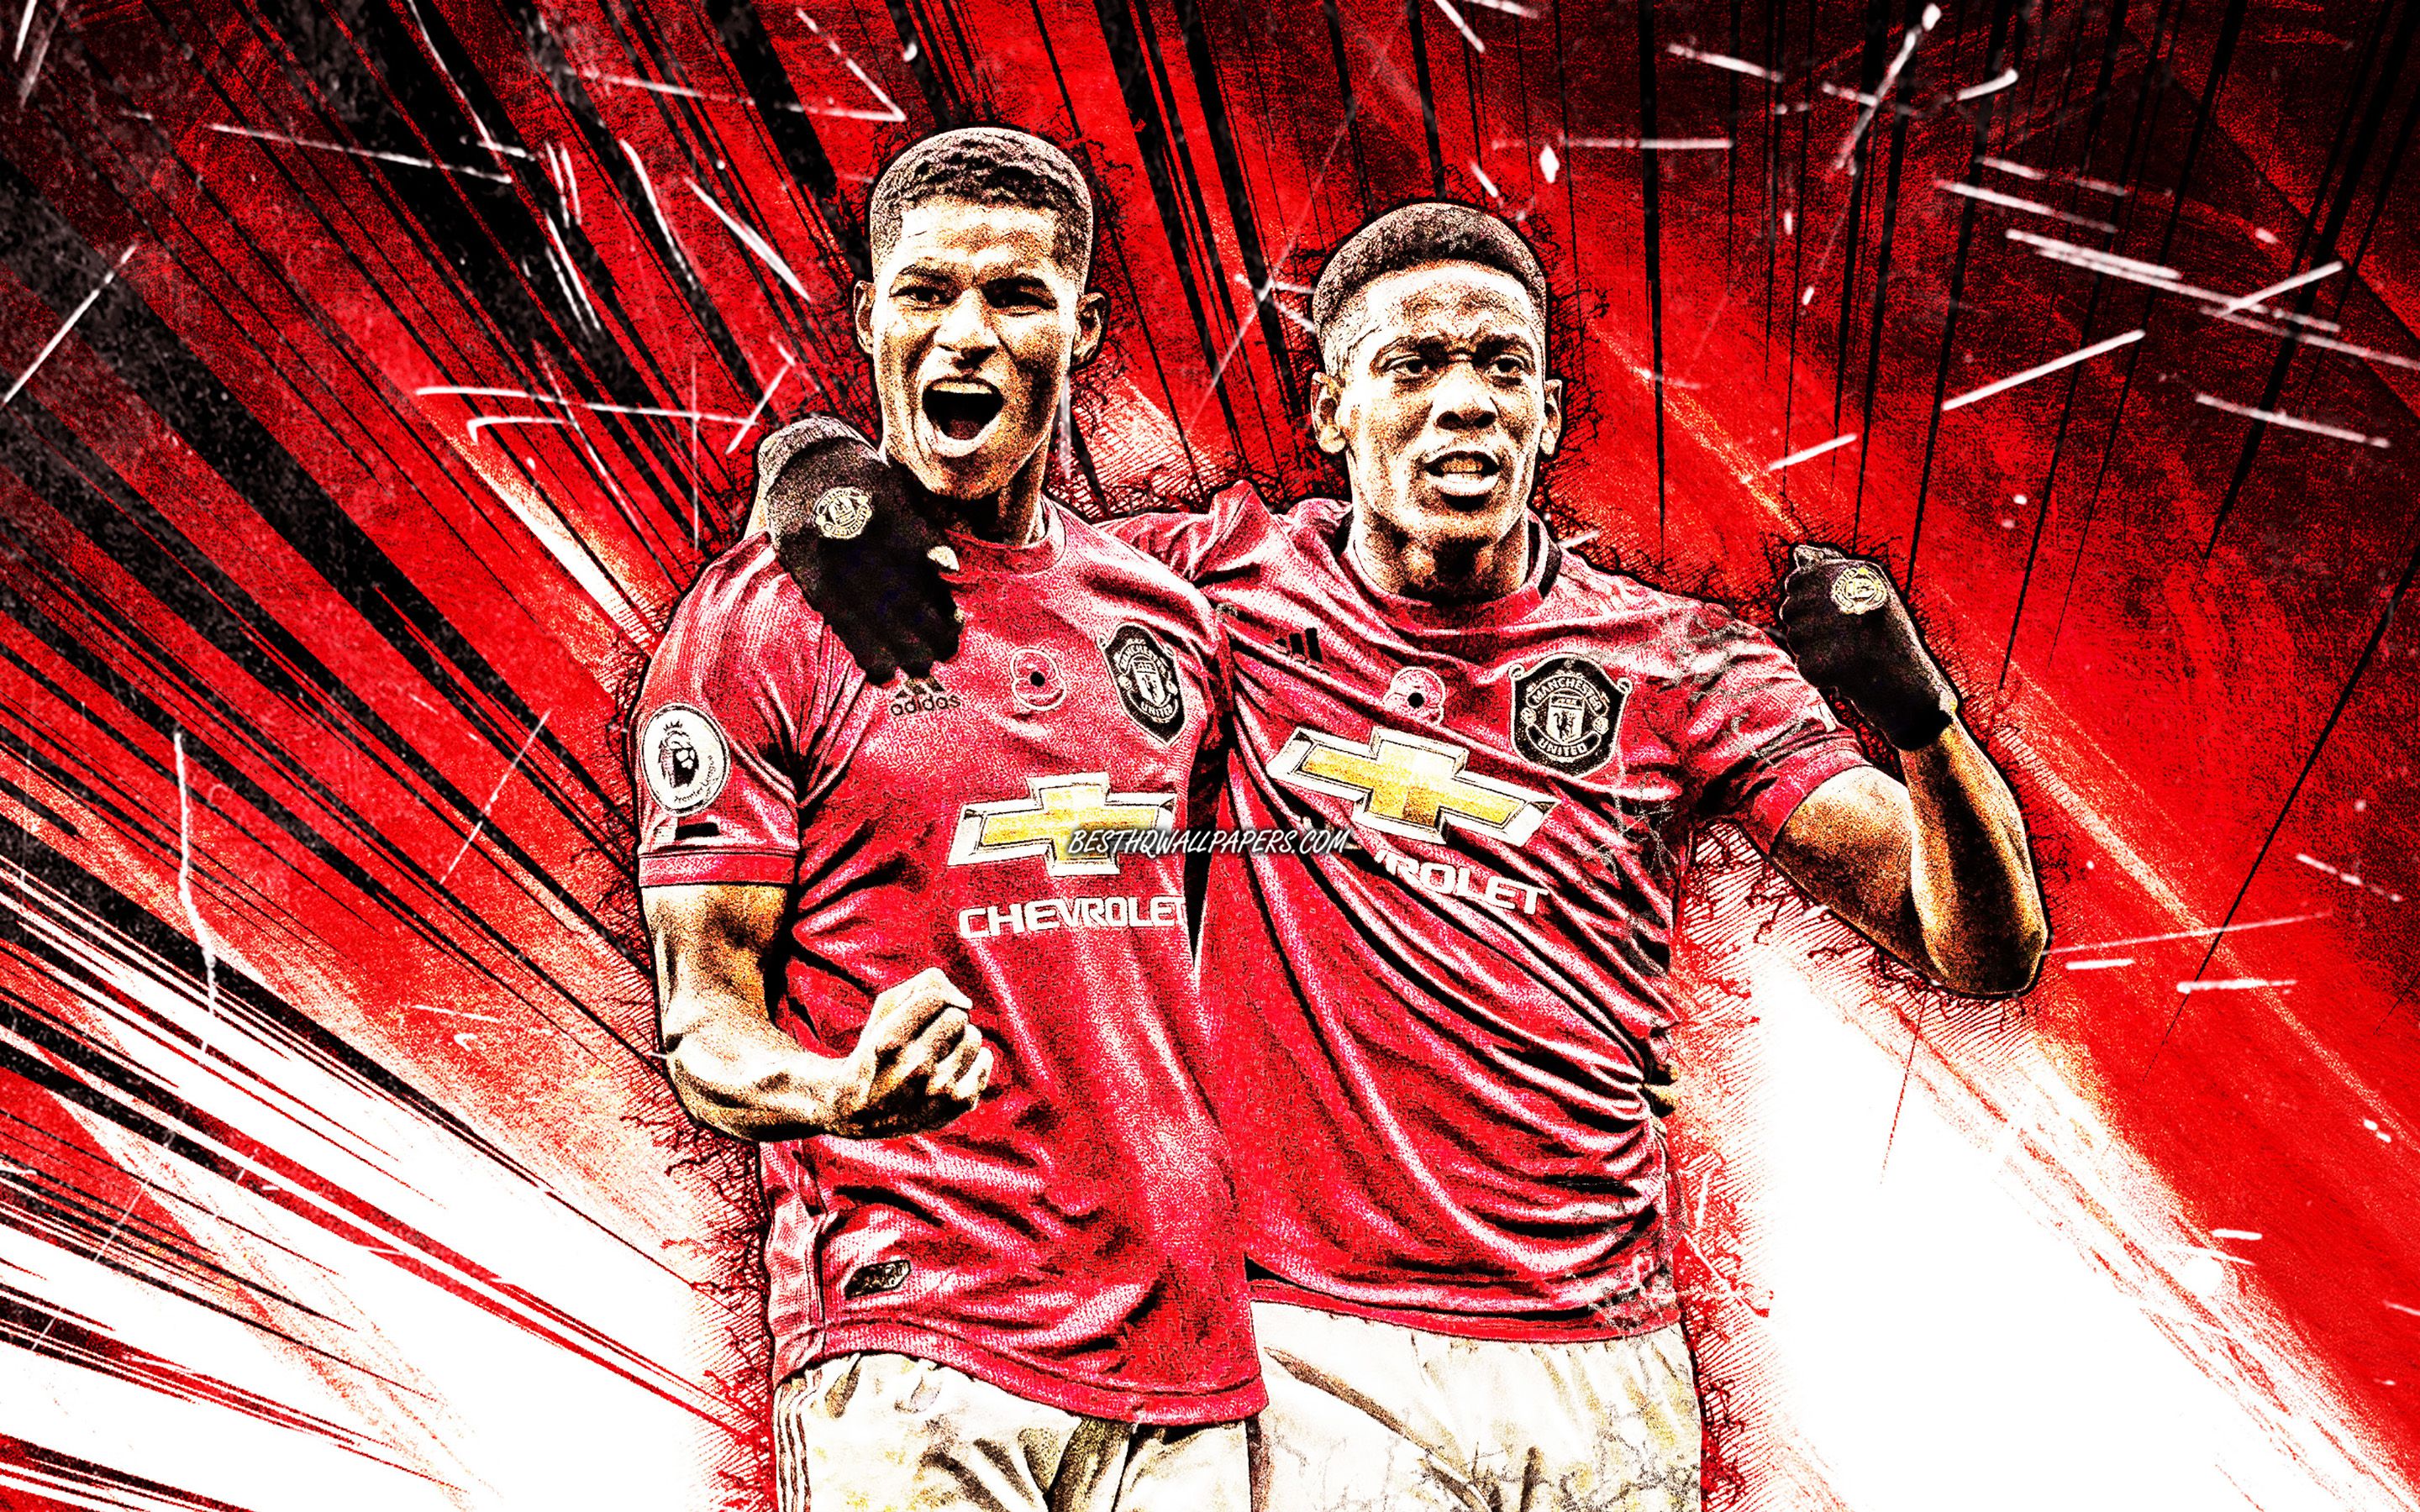 Download wallpapers Rashford and Martial, grunge art, Manchester